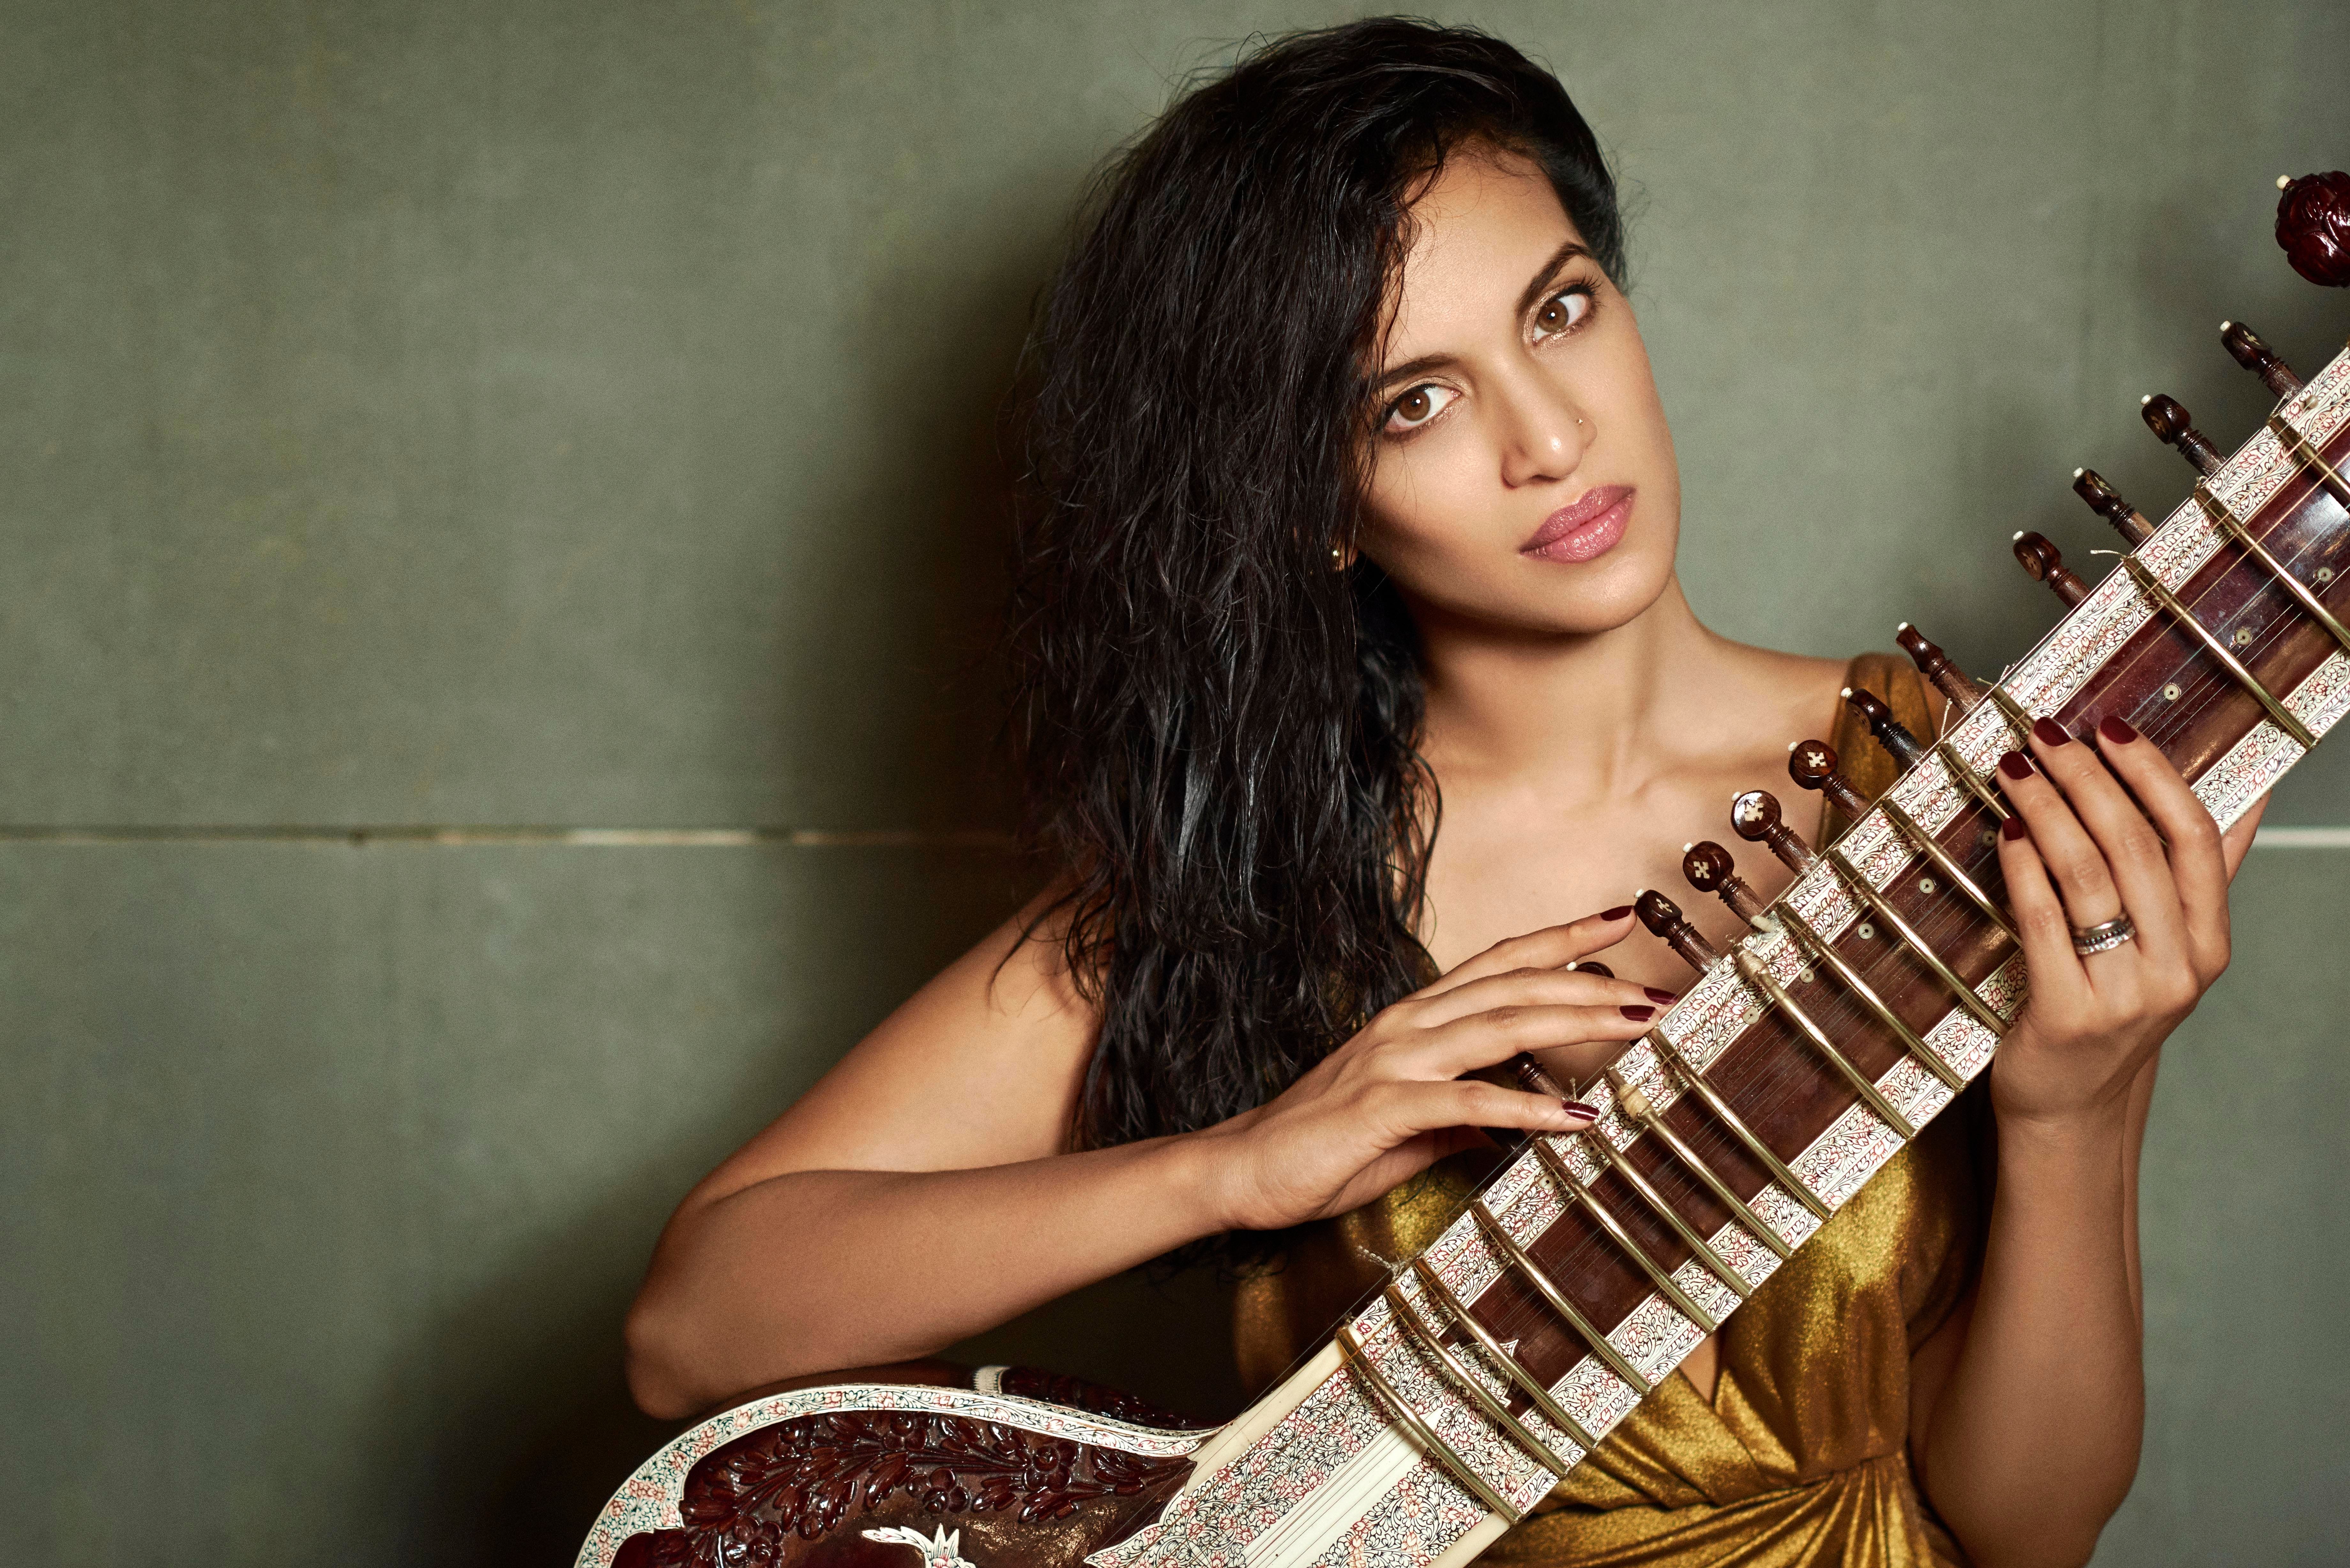 Anoushka Shankar Celebrates Two Decades of Recording with ‘Reflections’ (interview)